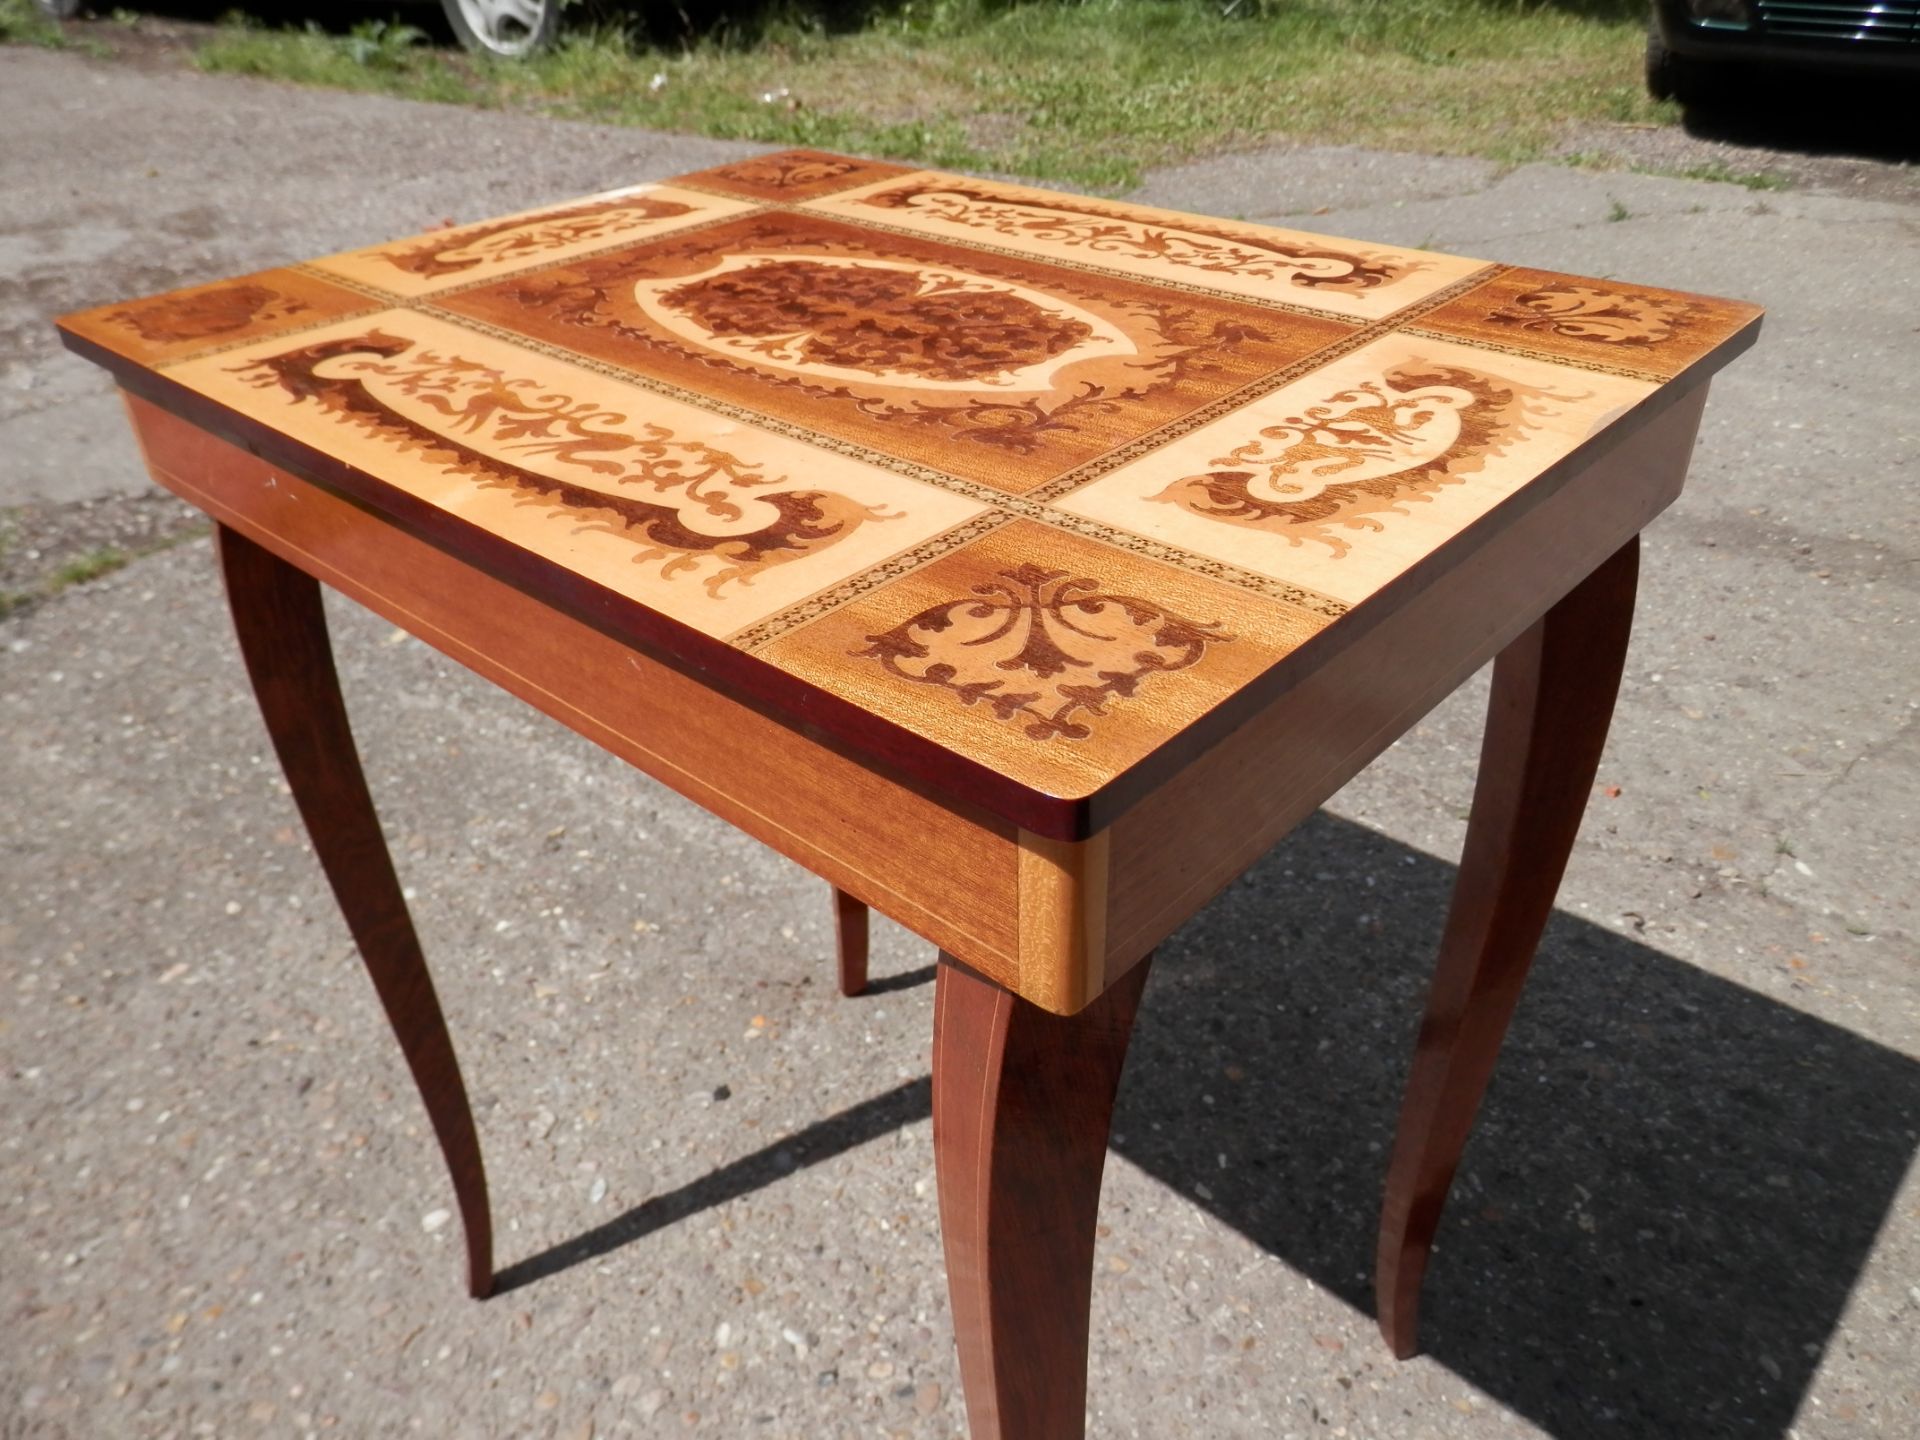 SEE VIDEO. BEAUTIFUL 1960S ITALIAN 13" X 17" MUSICAL TABLE, 20" HIGH, PLAYS "RAINDROPS" WHEN OPENED. - Image 7 of 7